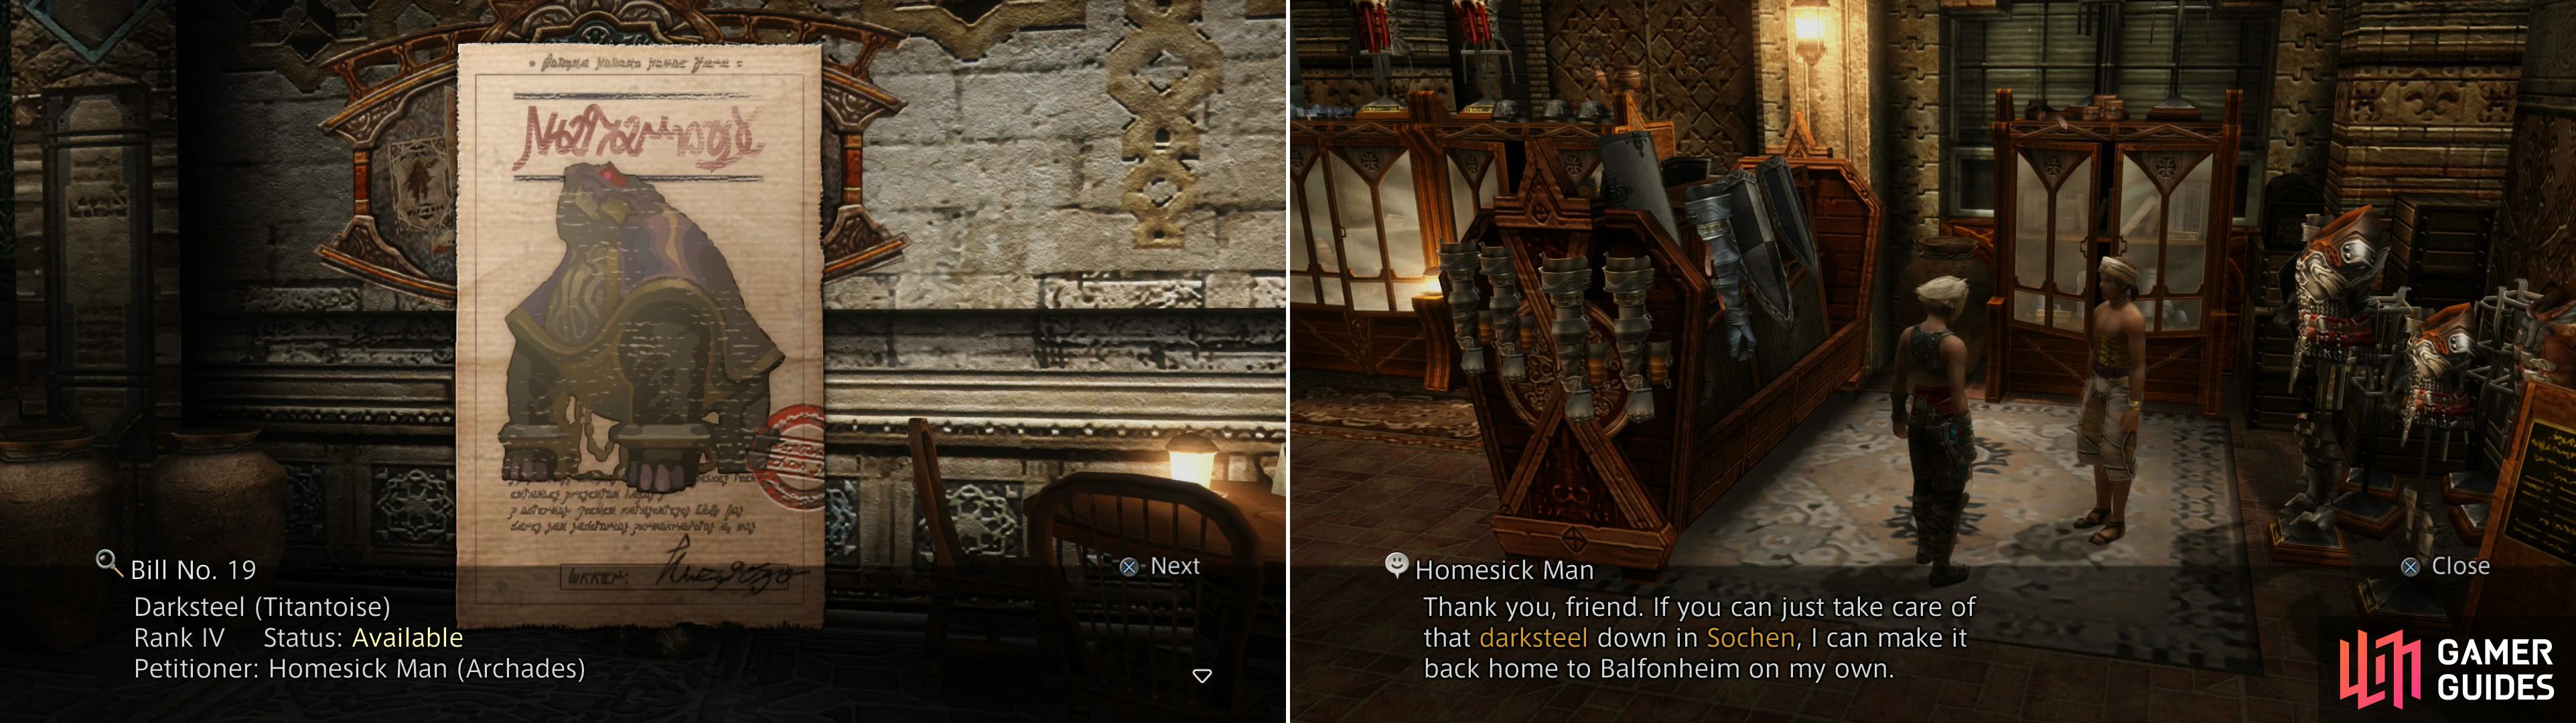 Pick up hte Darksteel hunt (left), then talk to the Homesick Man to learn the details (right).